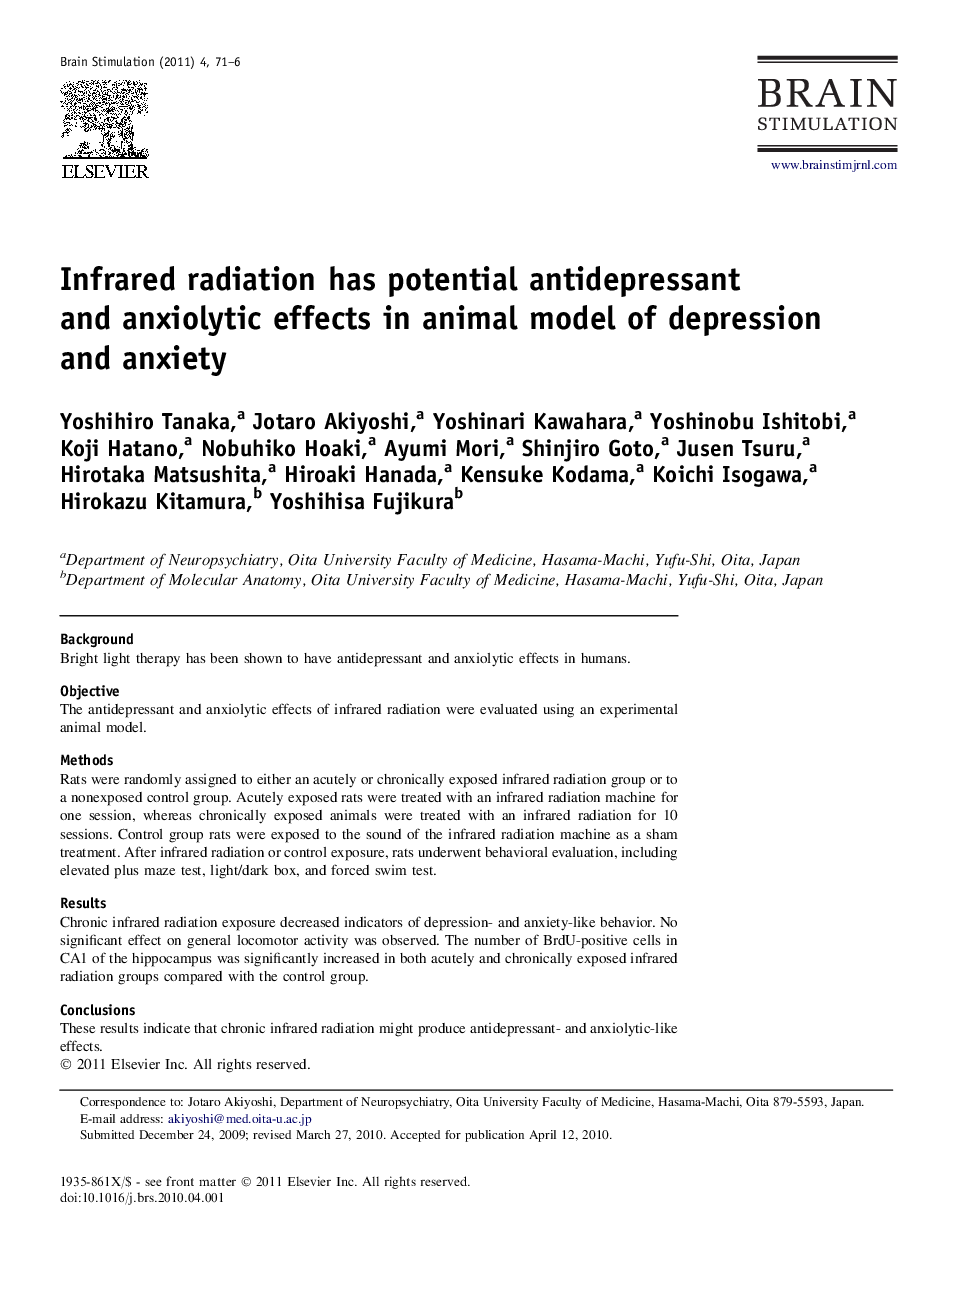 Infrared radiation has potential antidepressant and anxiolytic effects in animal model of depression and anxiety